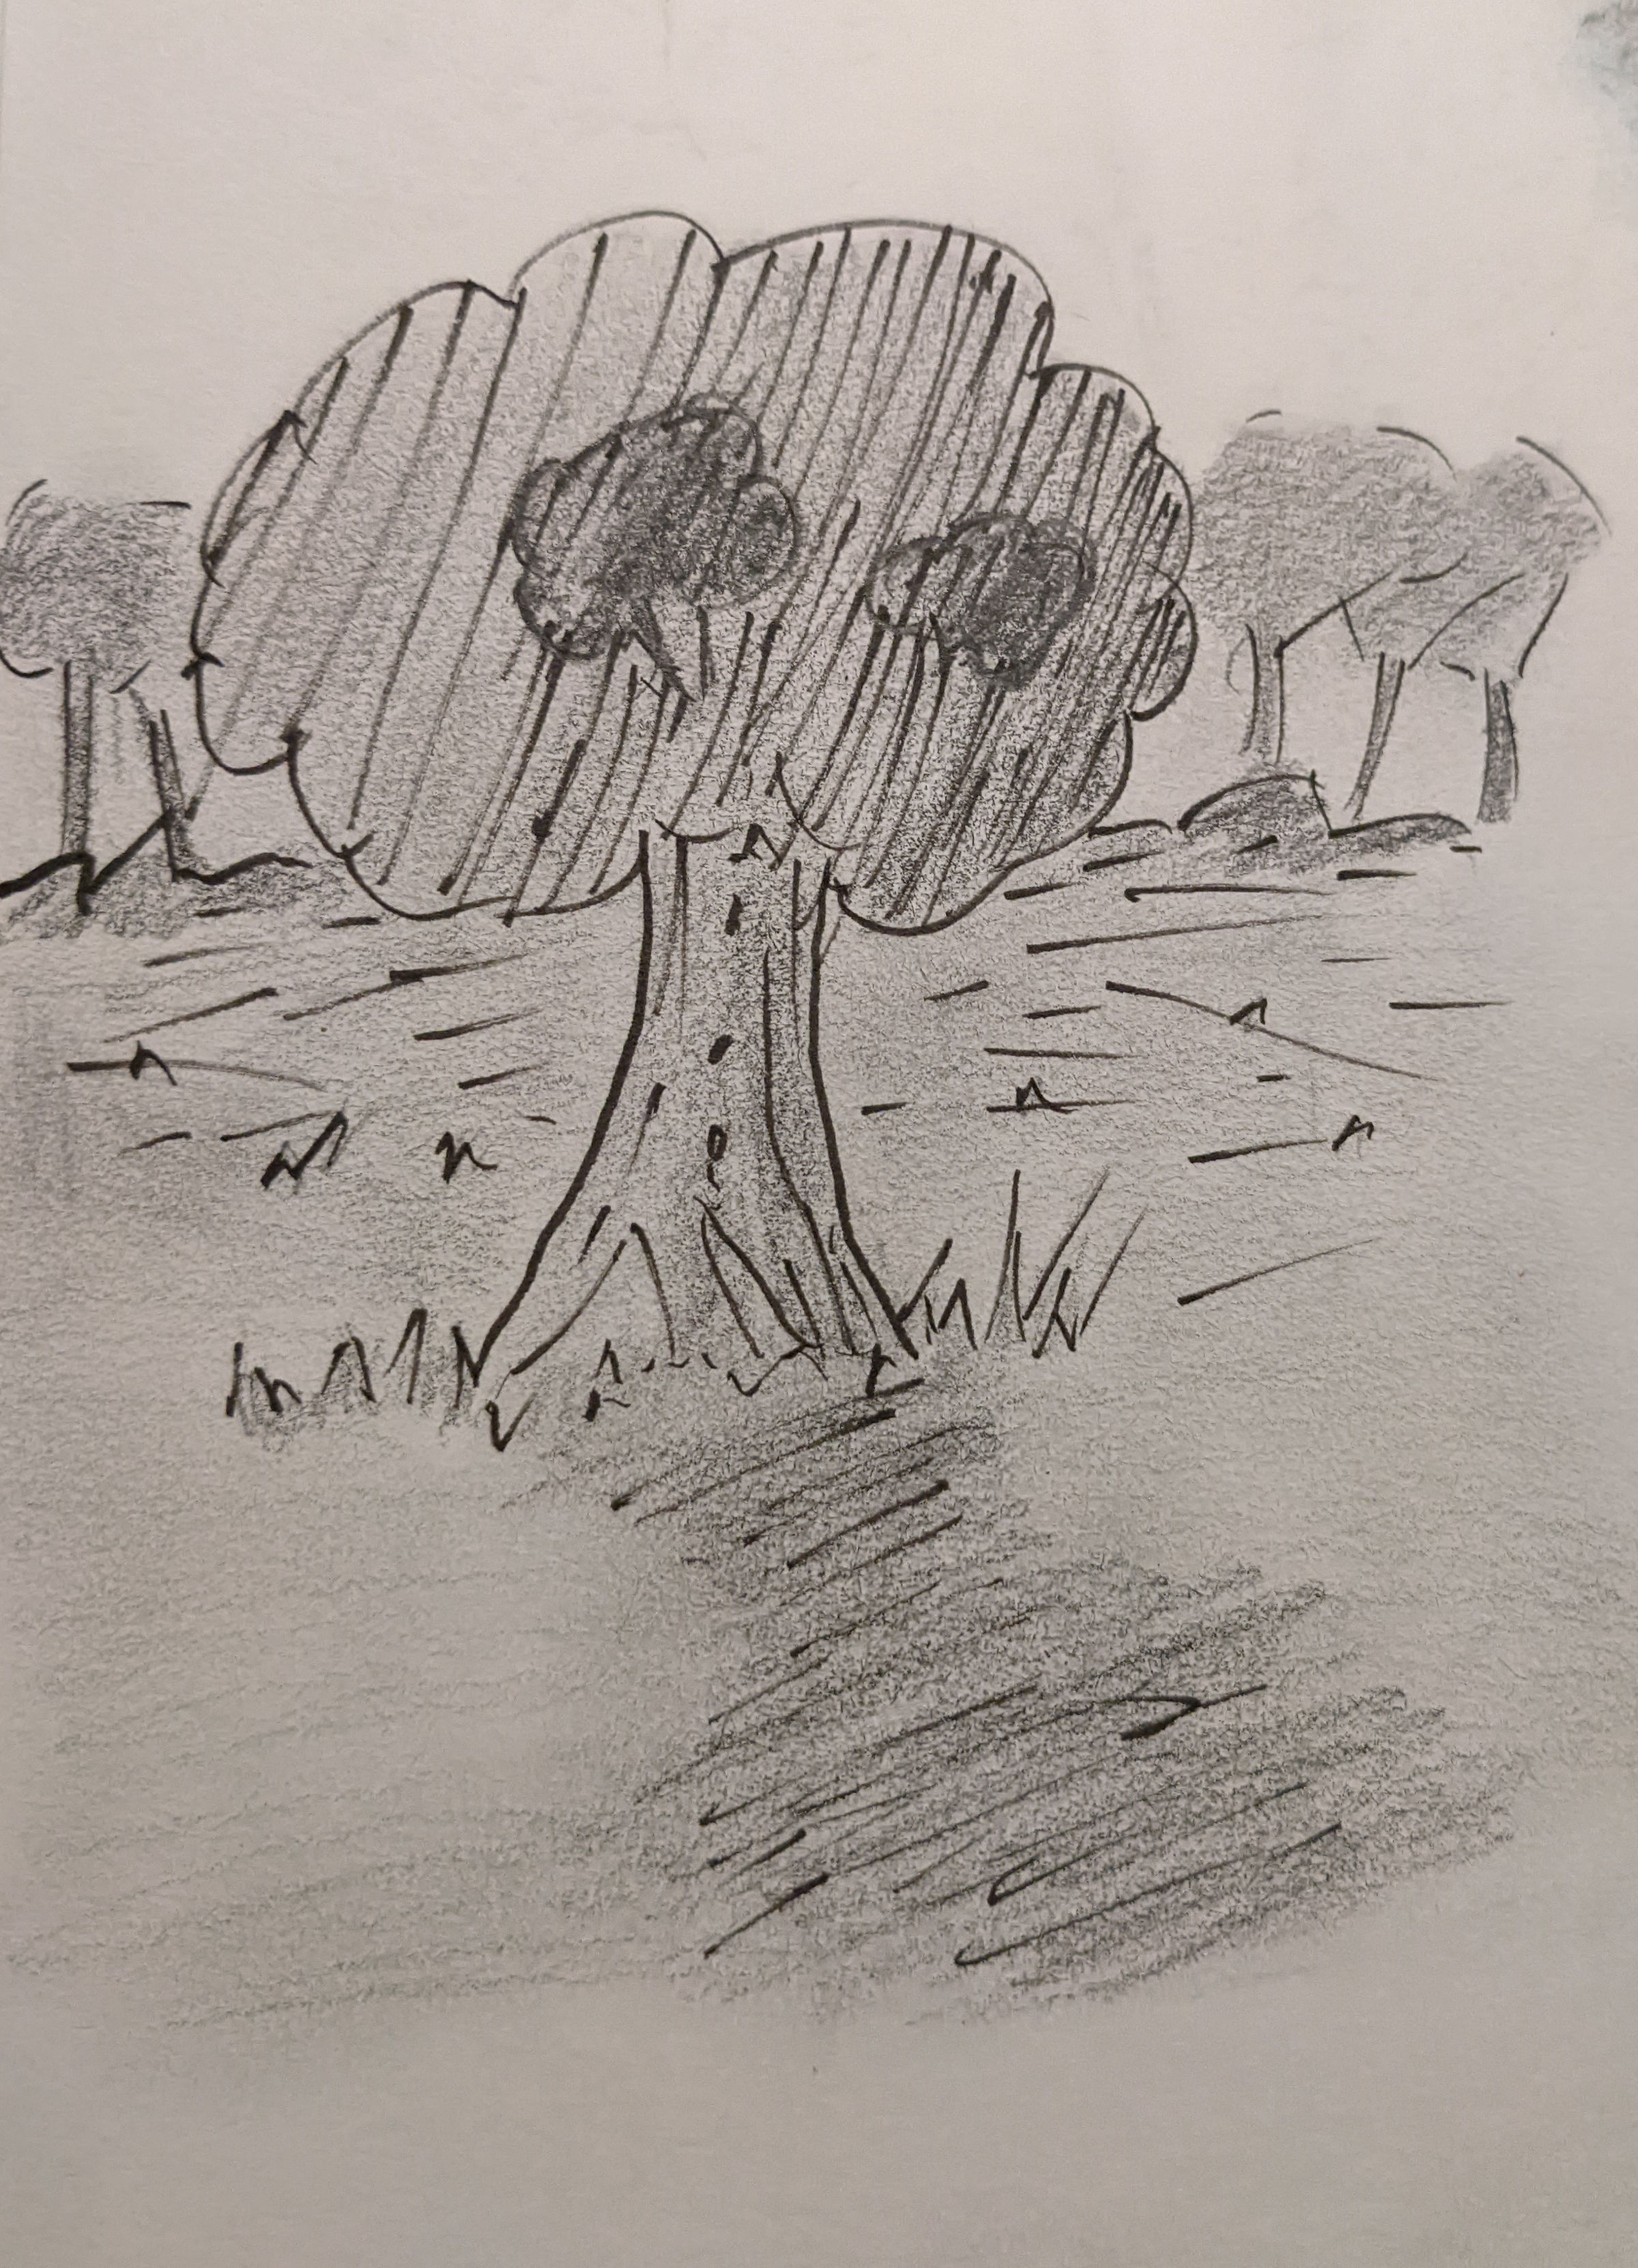 Scenery sketch of an open forest with a big tree and smaller ones in the distance.